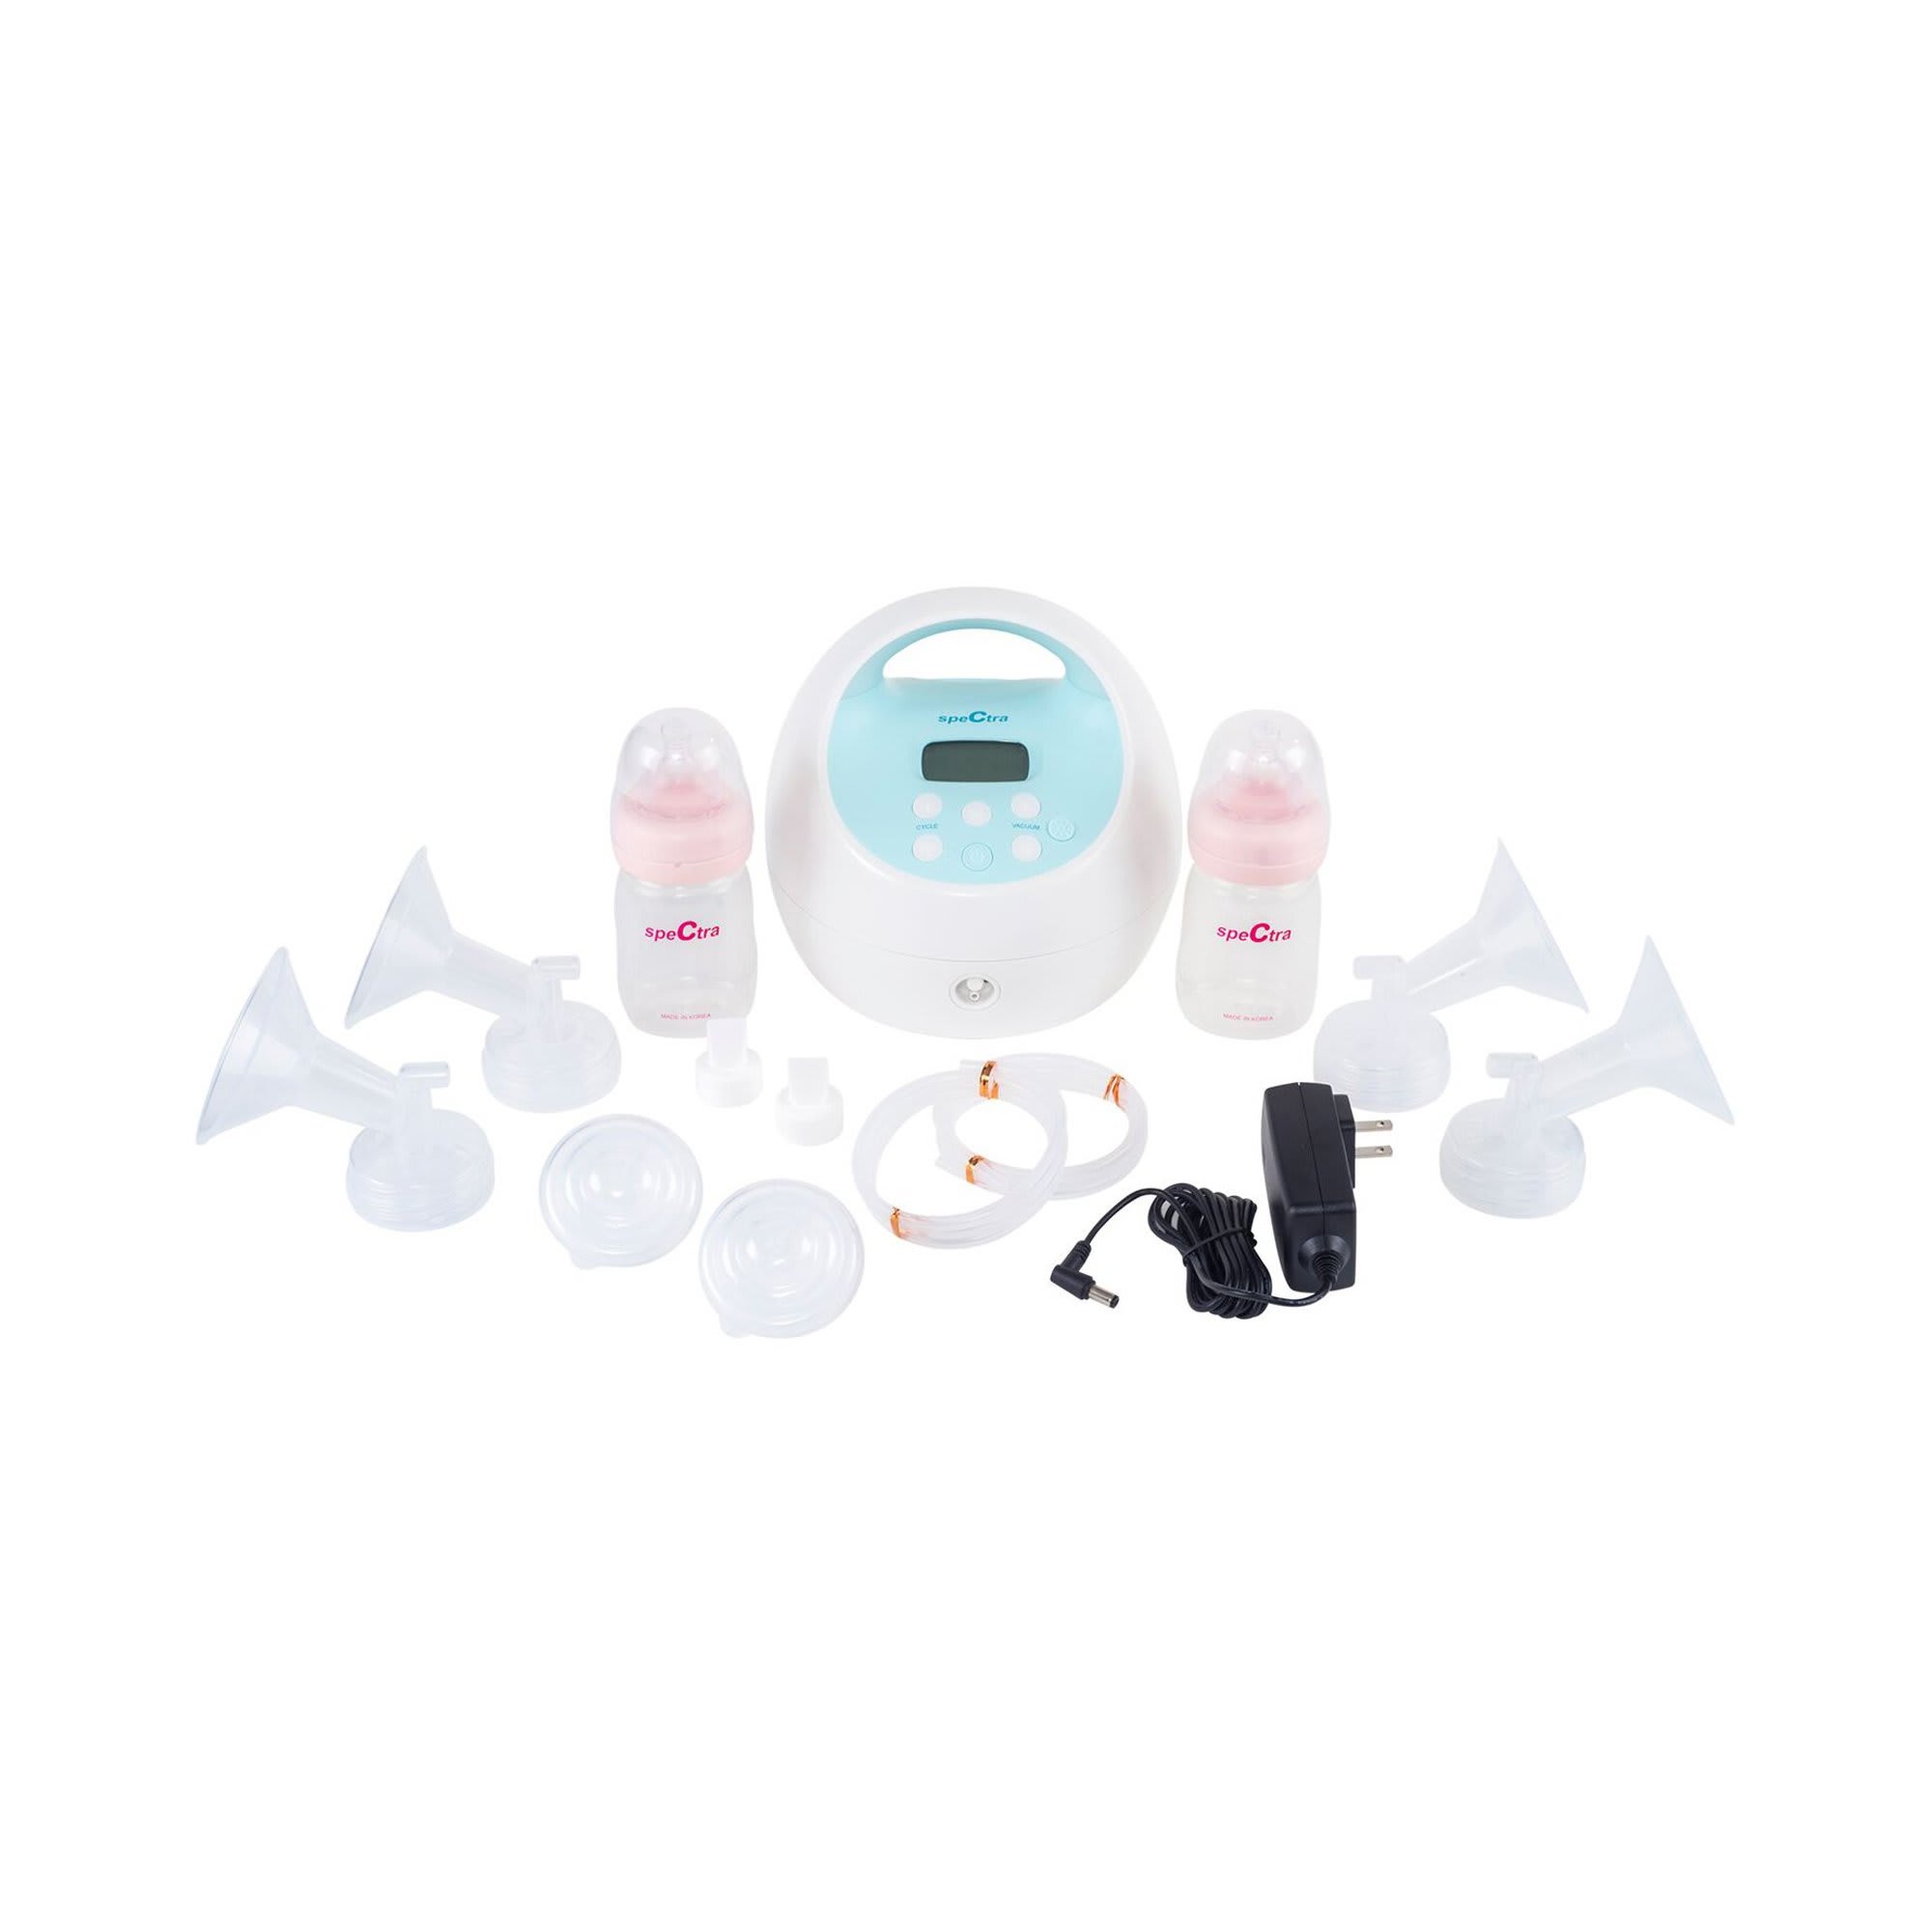 Spectra S1 Plus Electric Breast Pump Hospital Strength - The